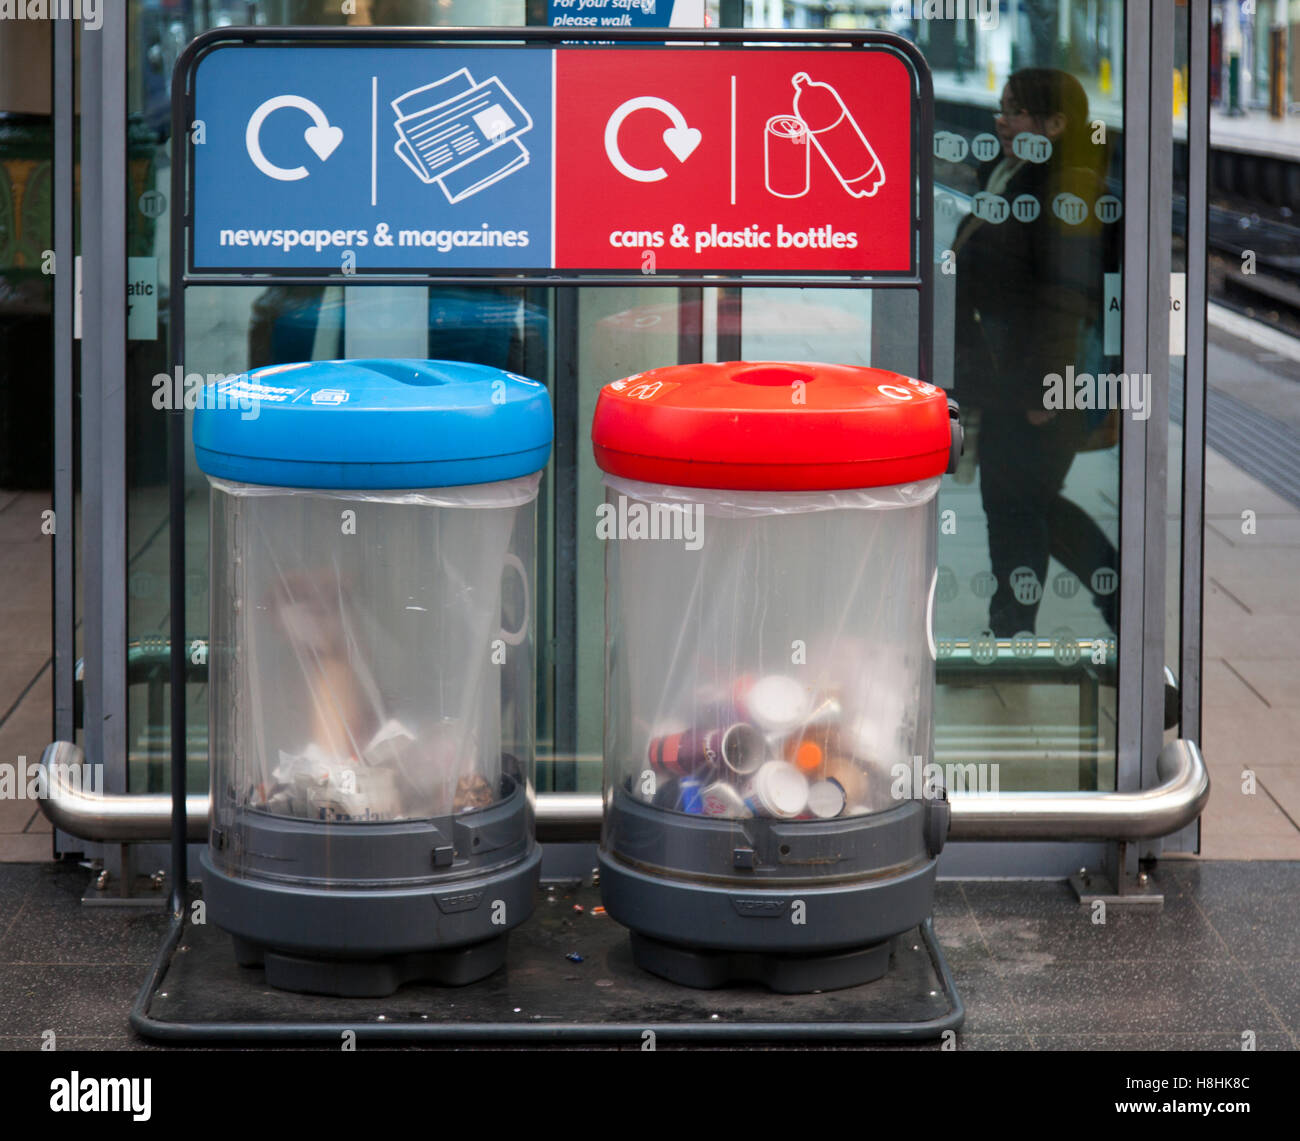 https://c8.alamy.com/comp/H8HK8C/manchester-piccadilly-new-design-clear-recycling-bags-and-bins-uk-H8HK8C.jpg